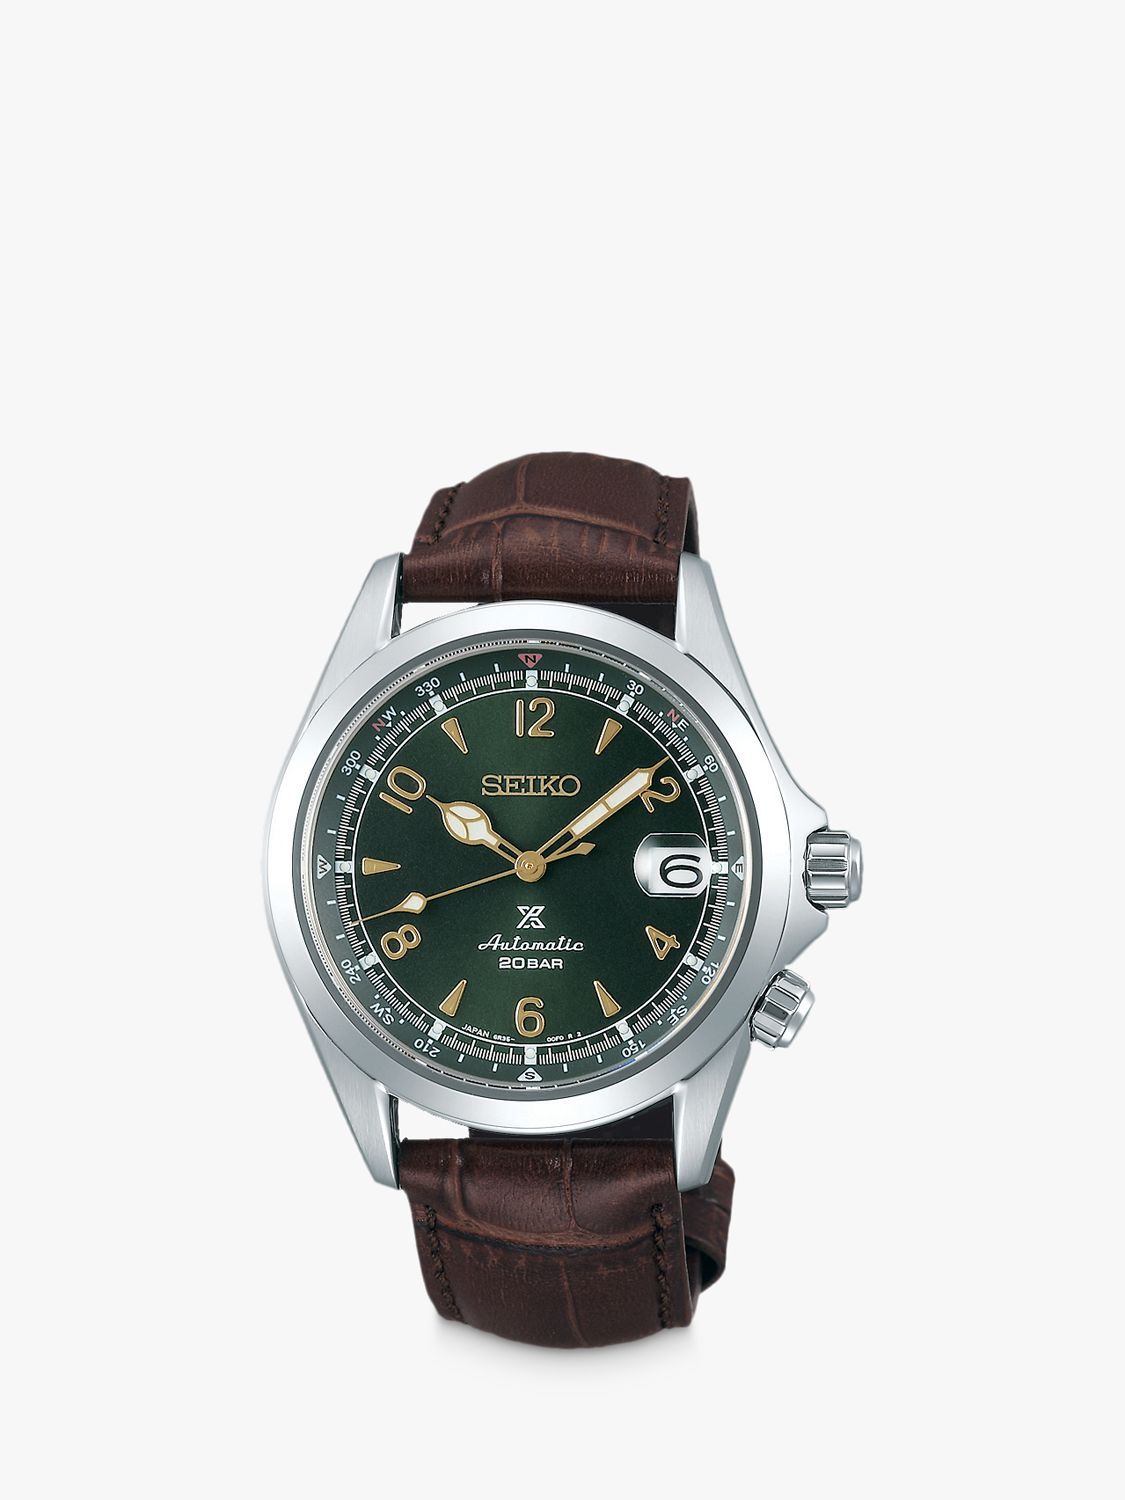 Buy Seiko SPB121J1 Men's Prospex Alpinist 2020 Automatic Date Leather Strap Watch, Brown/Green Online at johnlewis.com